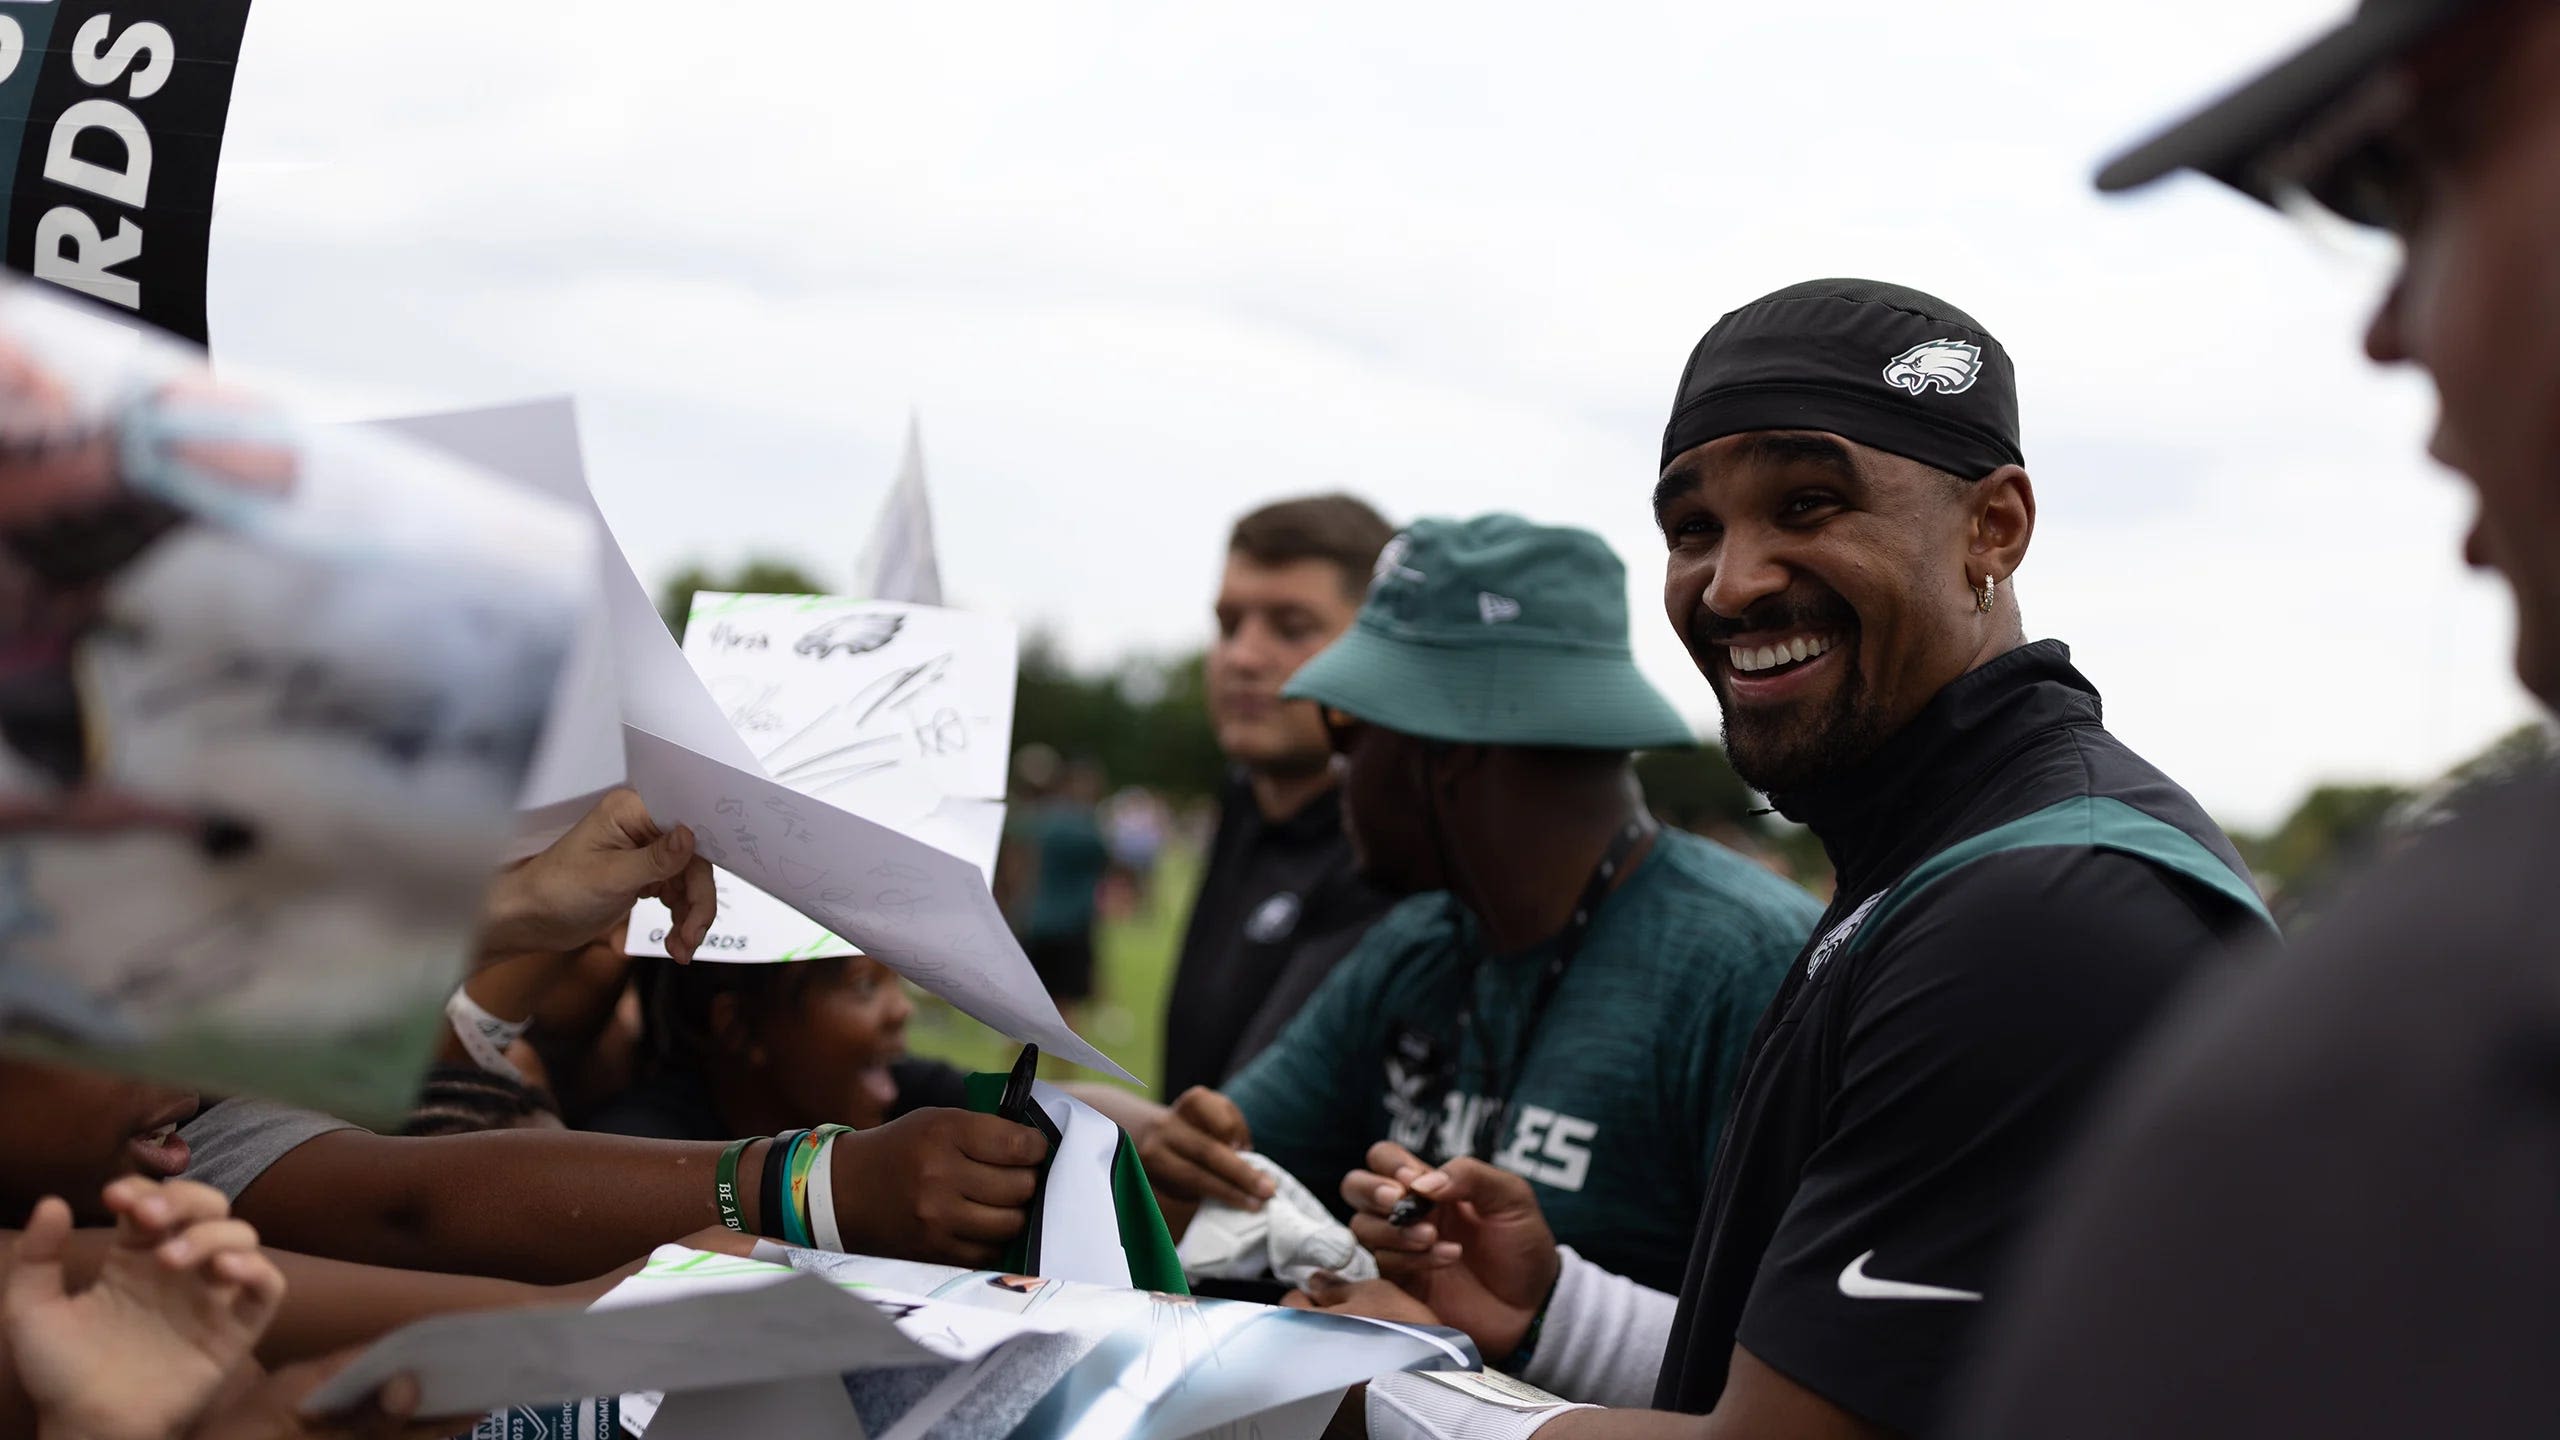 Eagles' fans most loyal: We go to away games, bet for our Birds, won't work for Steelers